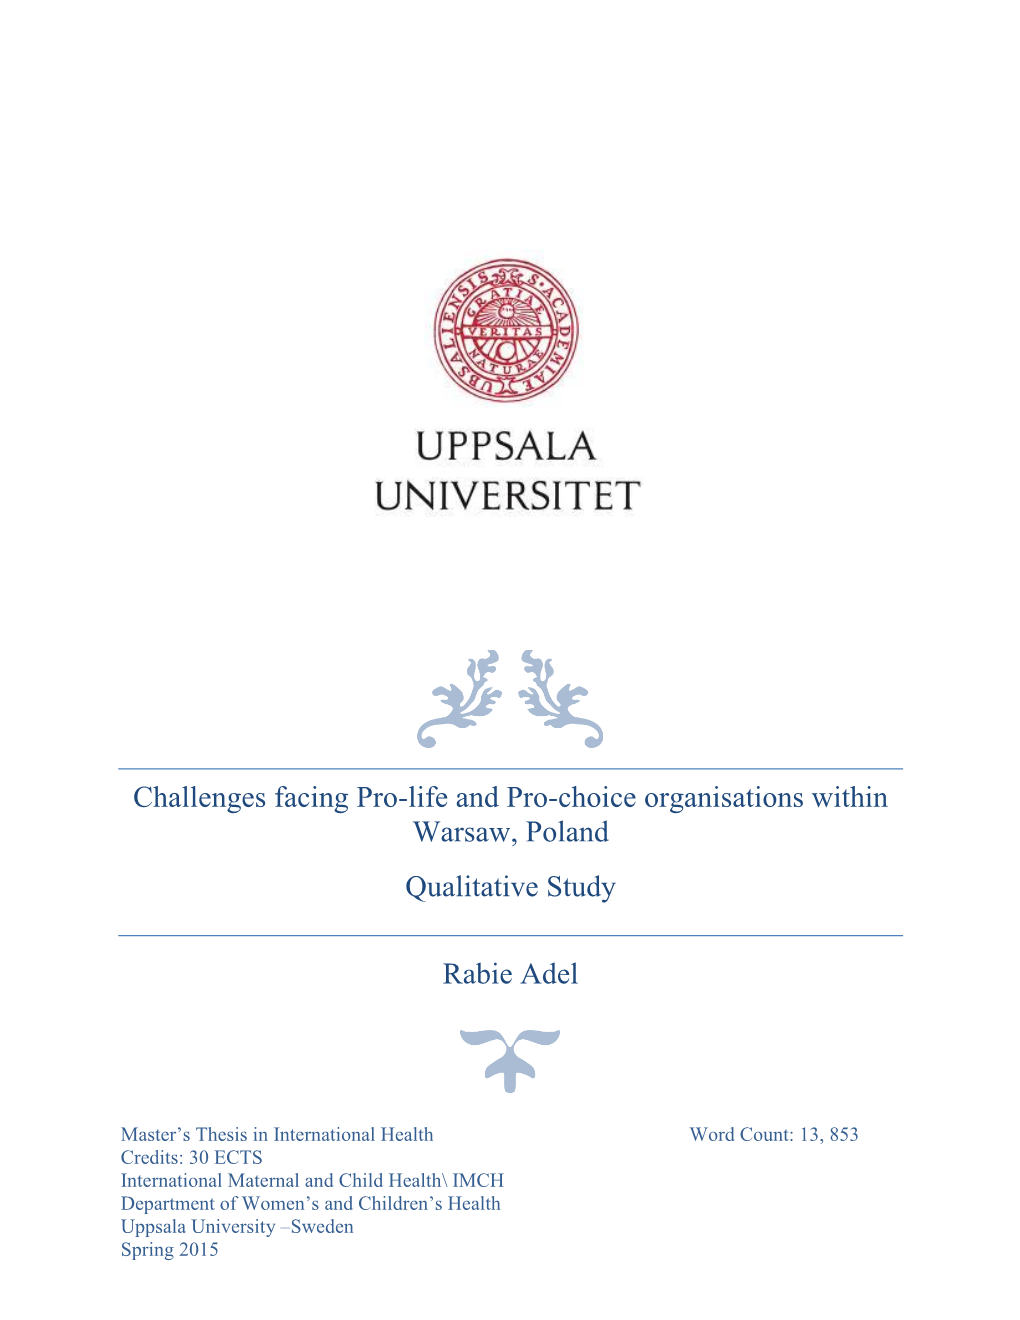 Challenges Facing Pro-Life and Pro-Choice Organisations Within Warsaw, Poland Qualitative Study